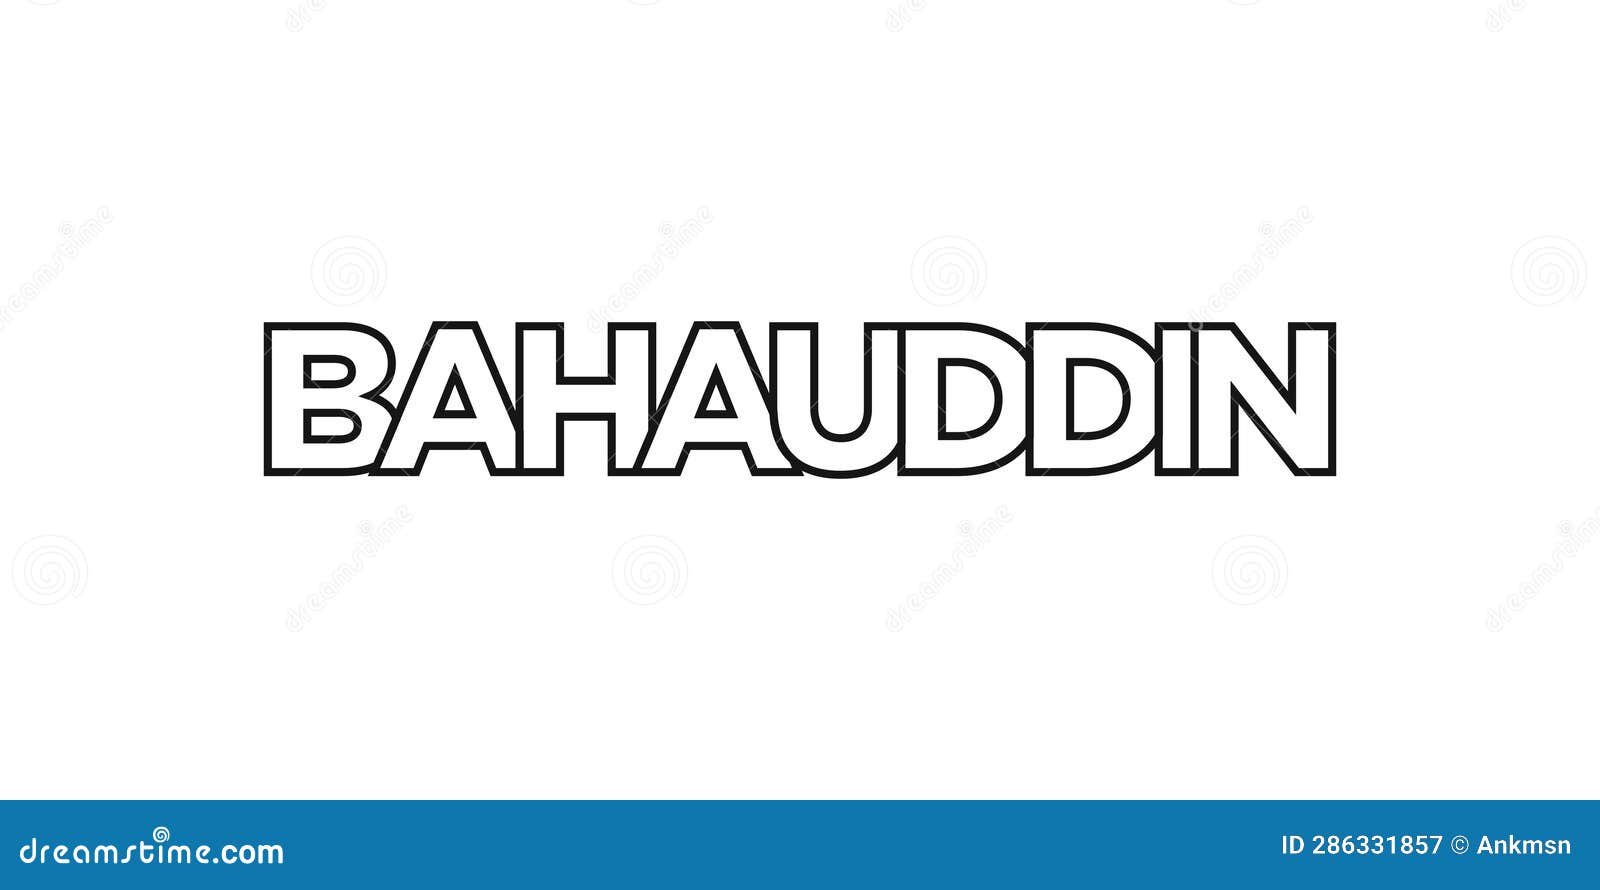 bahauddin in the pakistan emblem. the  features a geometric style,   with bold typography in a modern font